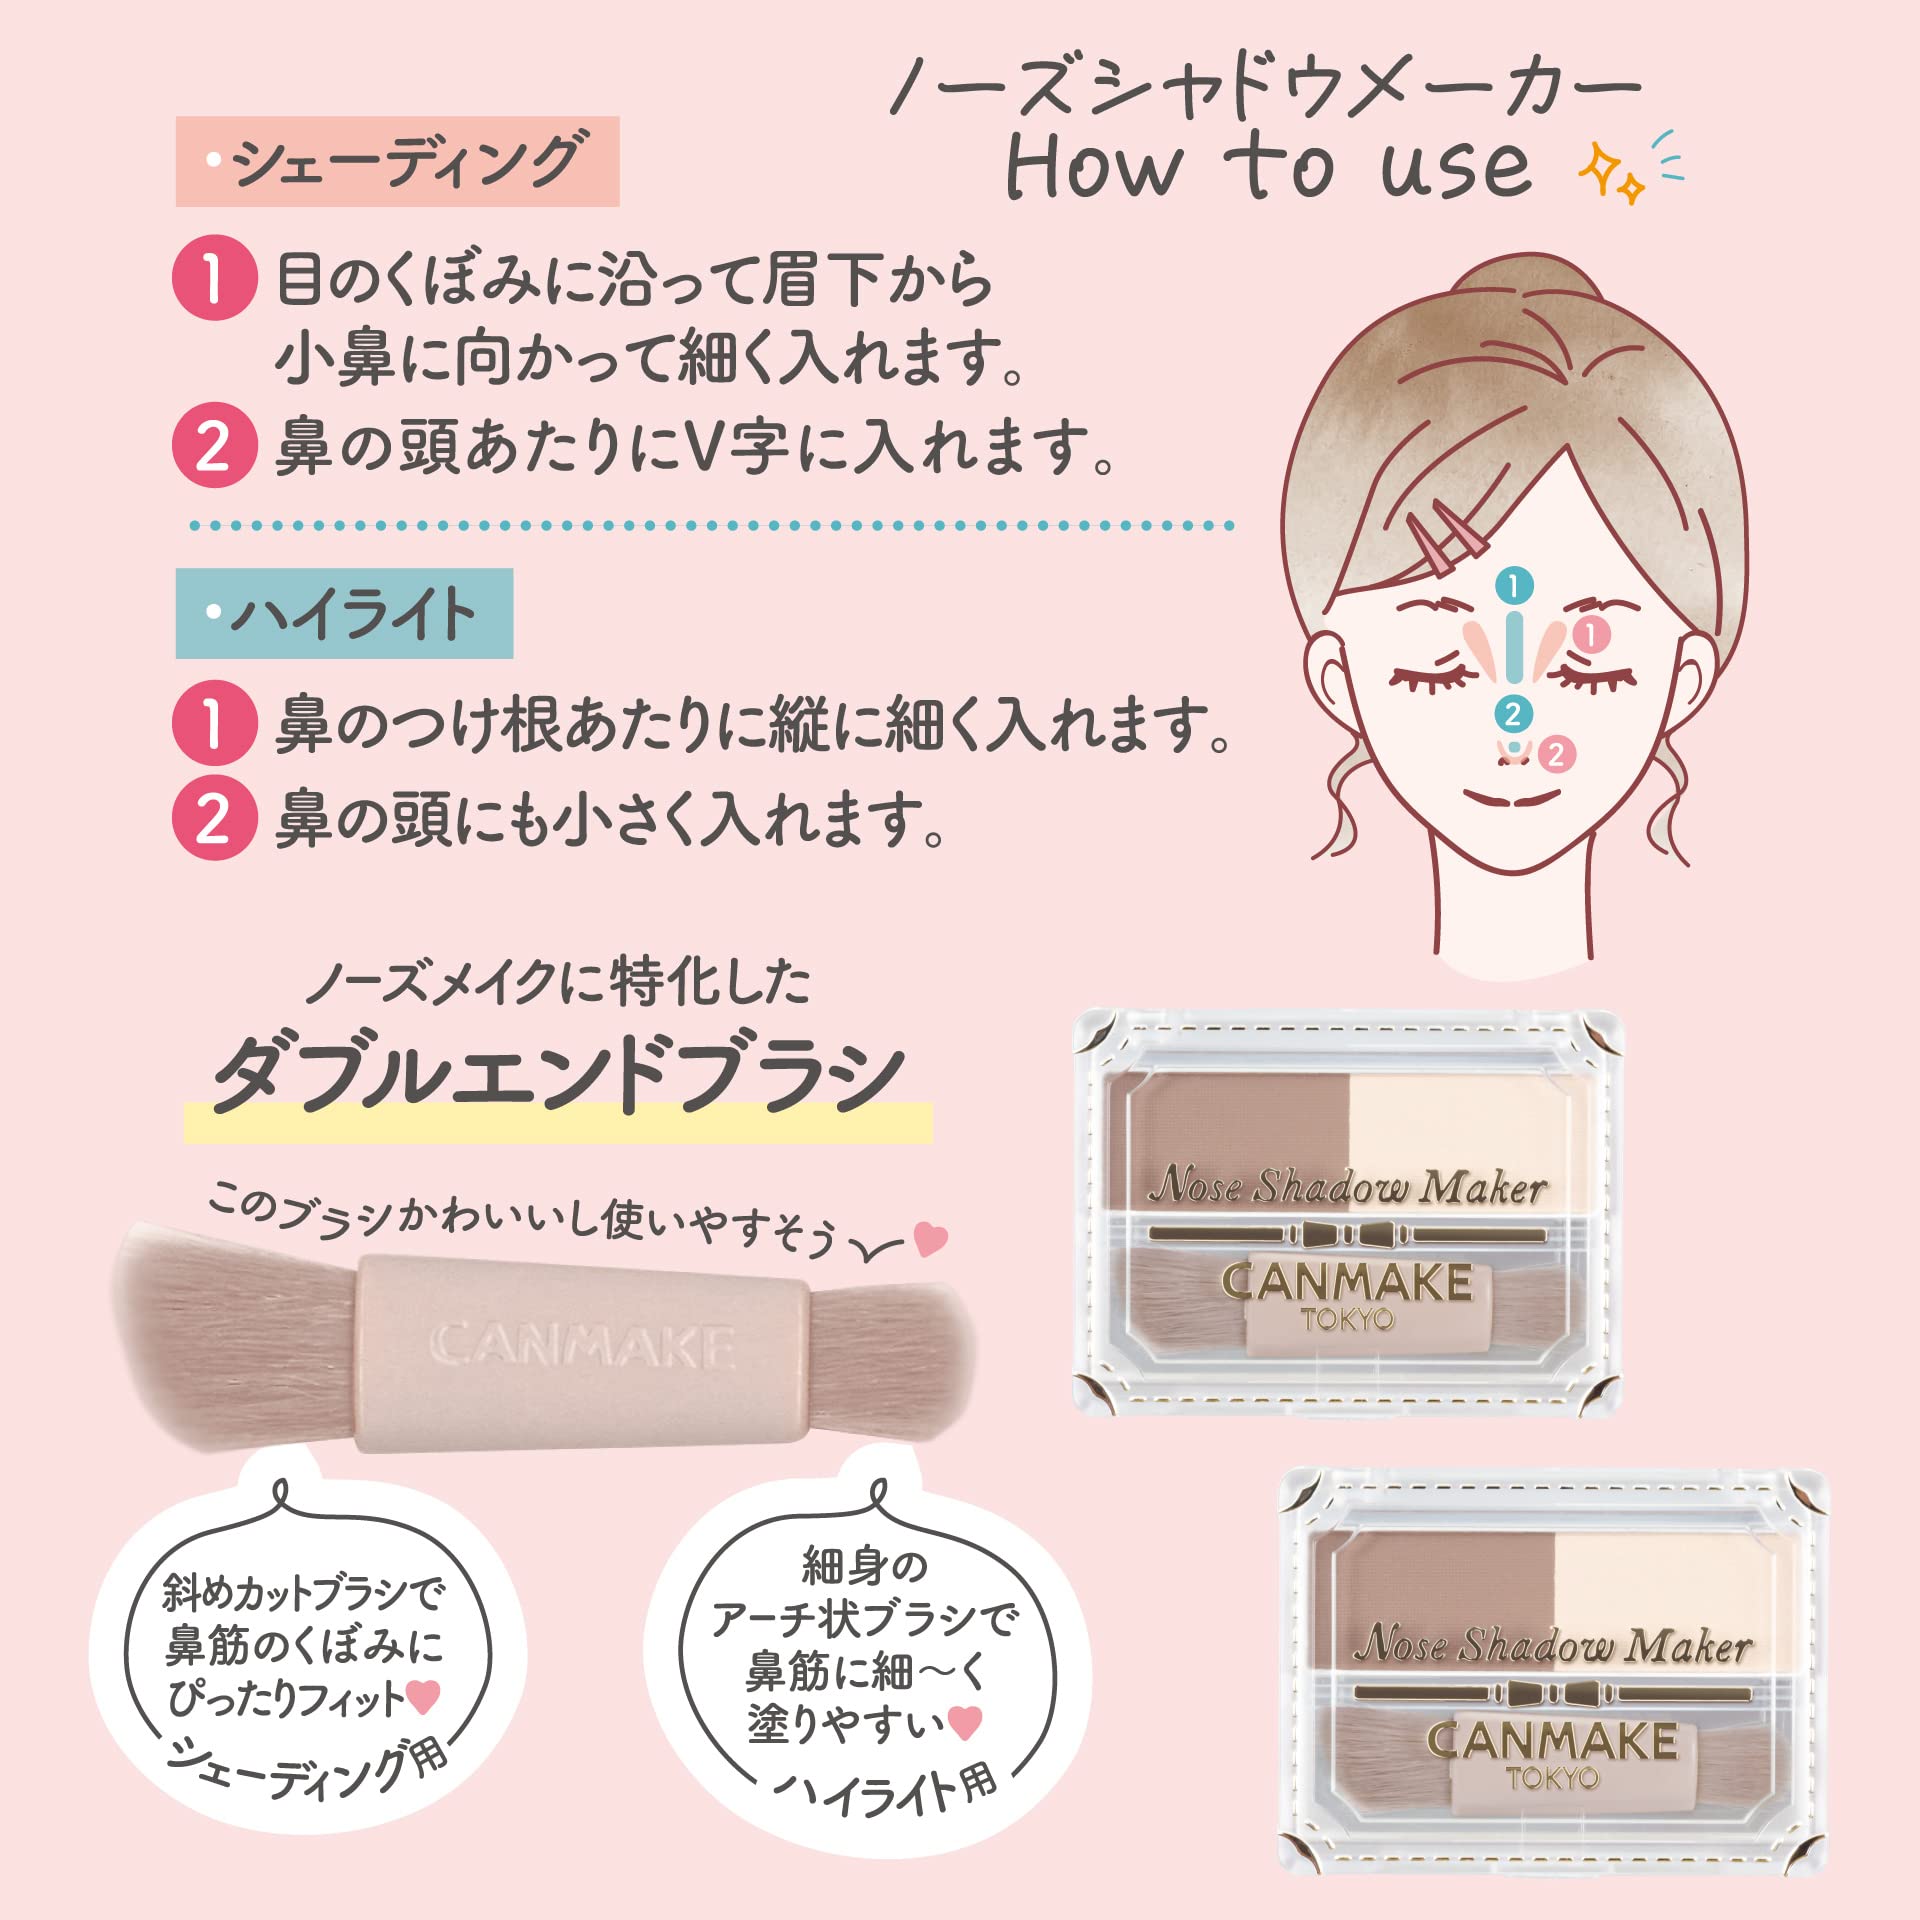 Canmake Nose Shadow Maker 02 - Grayish Pink Highlight and Shading 2.7G